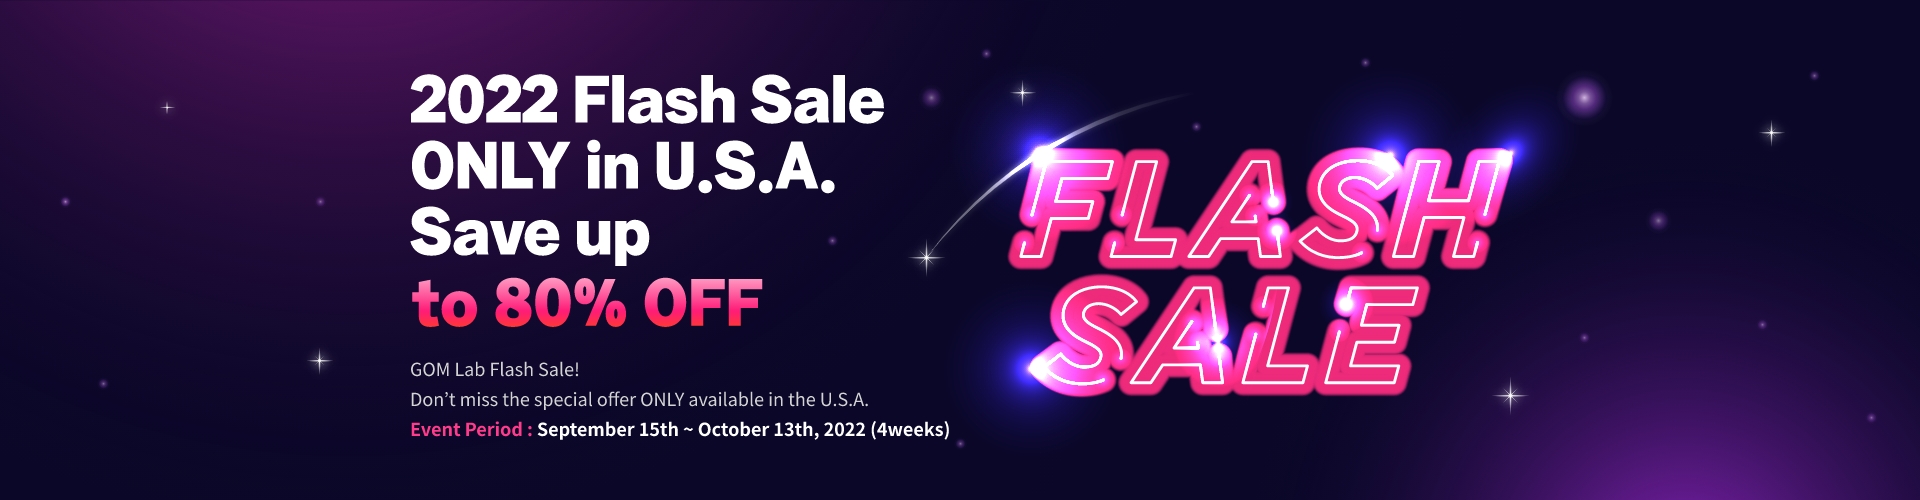 2022 Flash Sale ONLY in U.S.A. Save up to 80% OFF